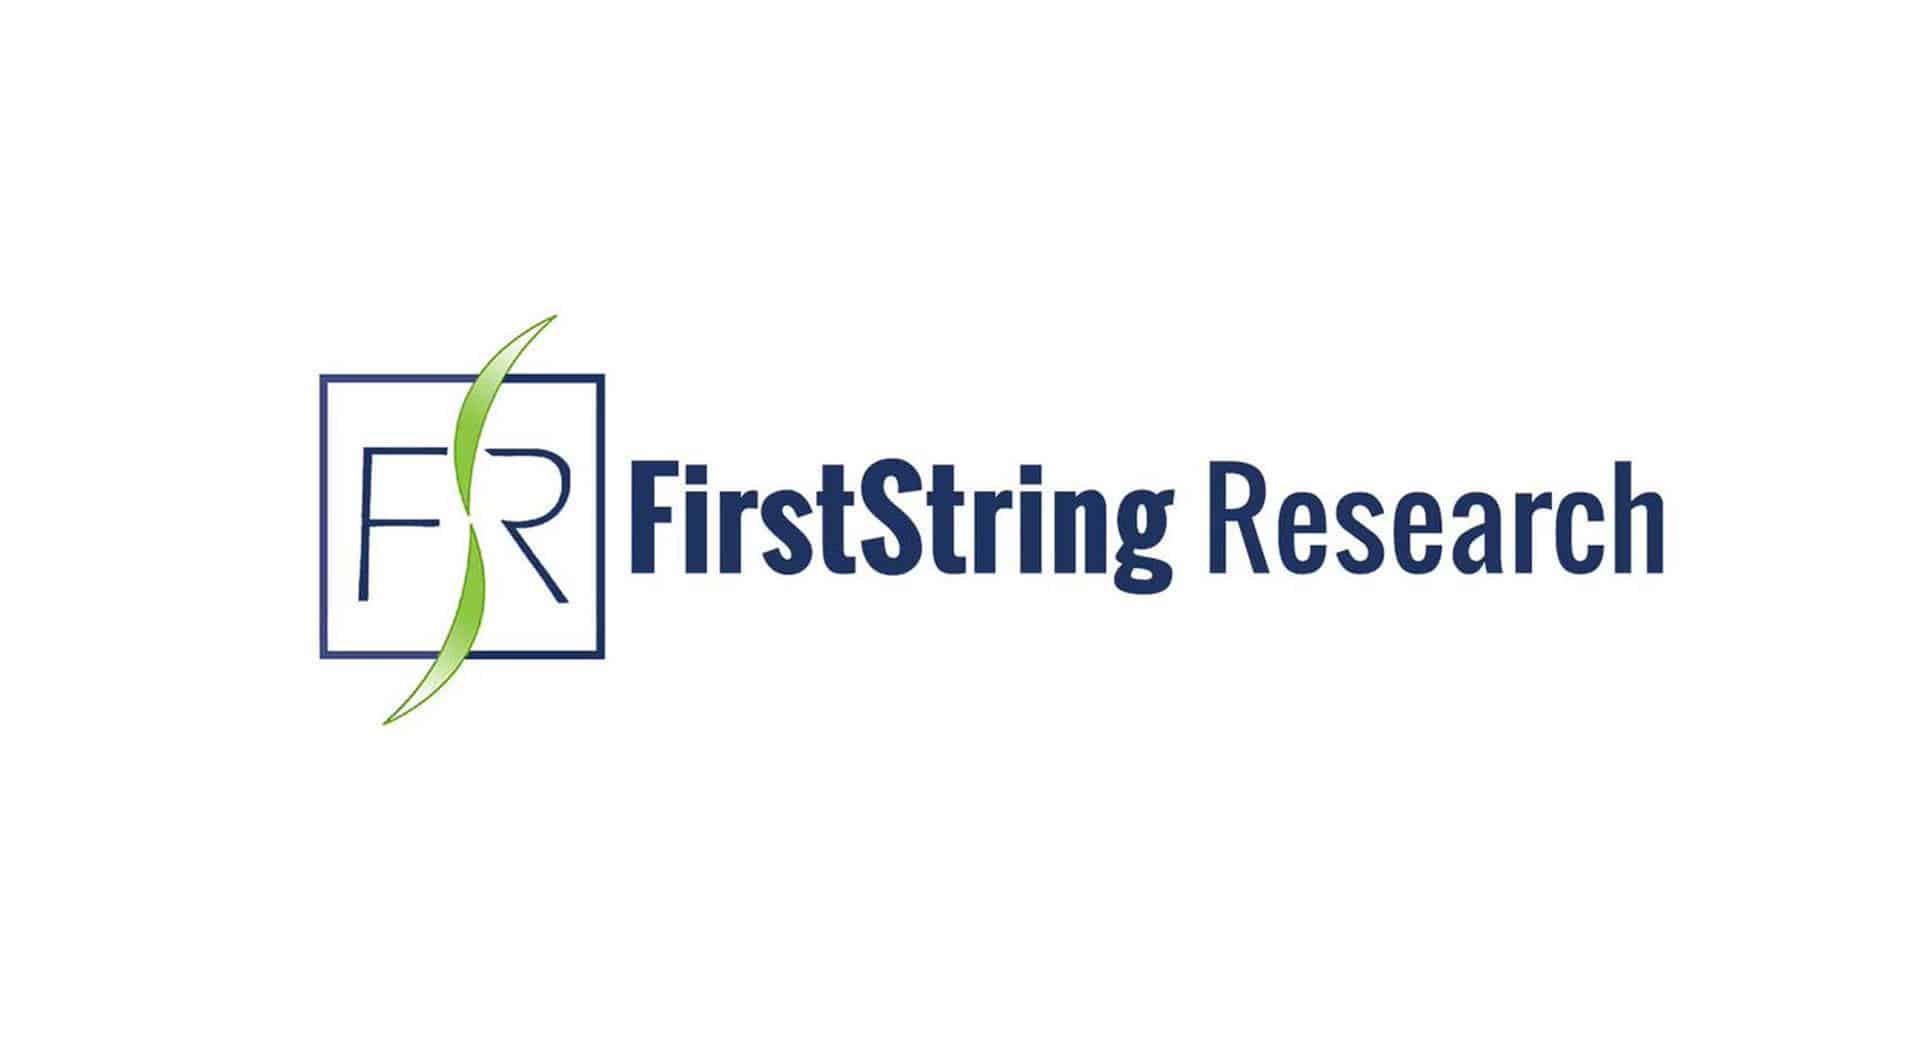 First String Research logo